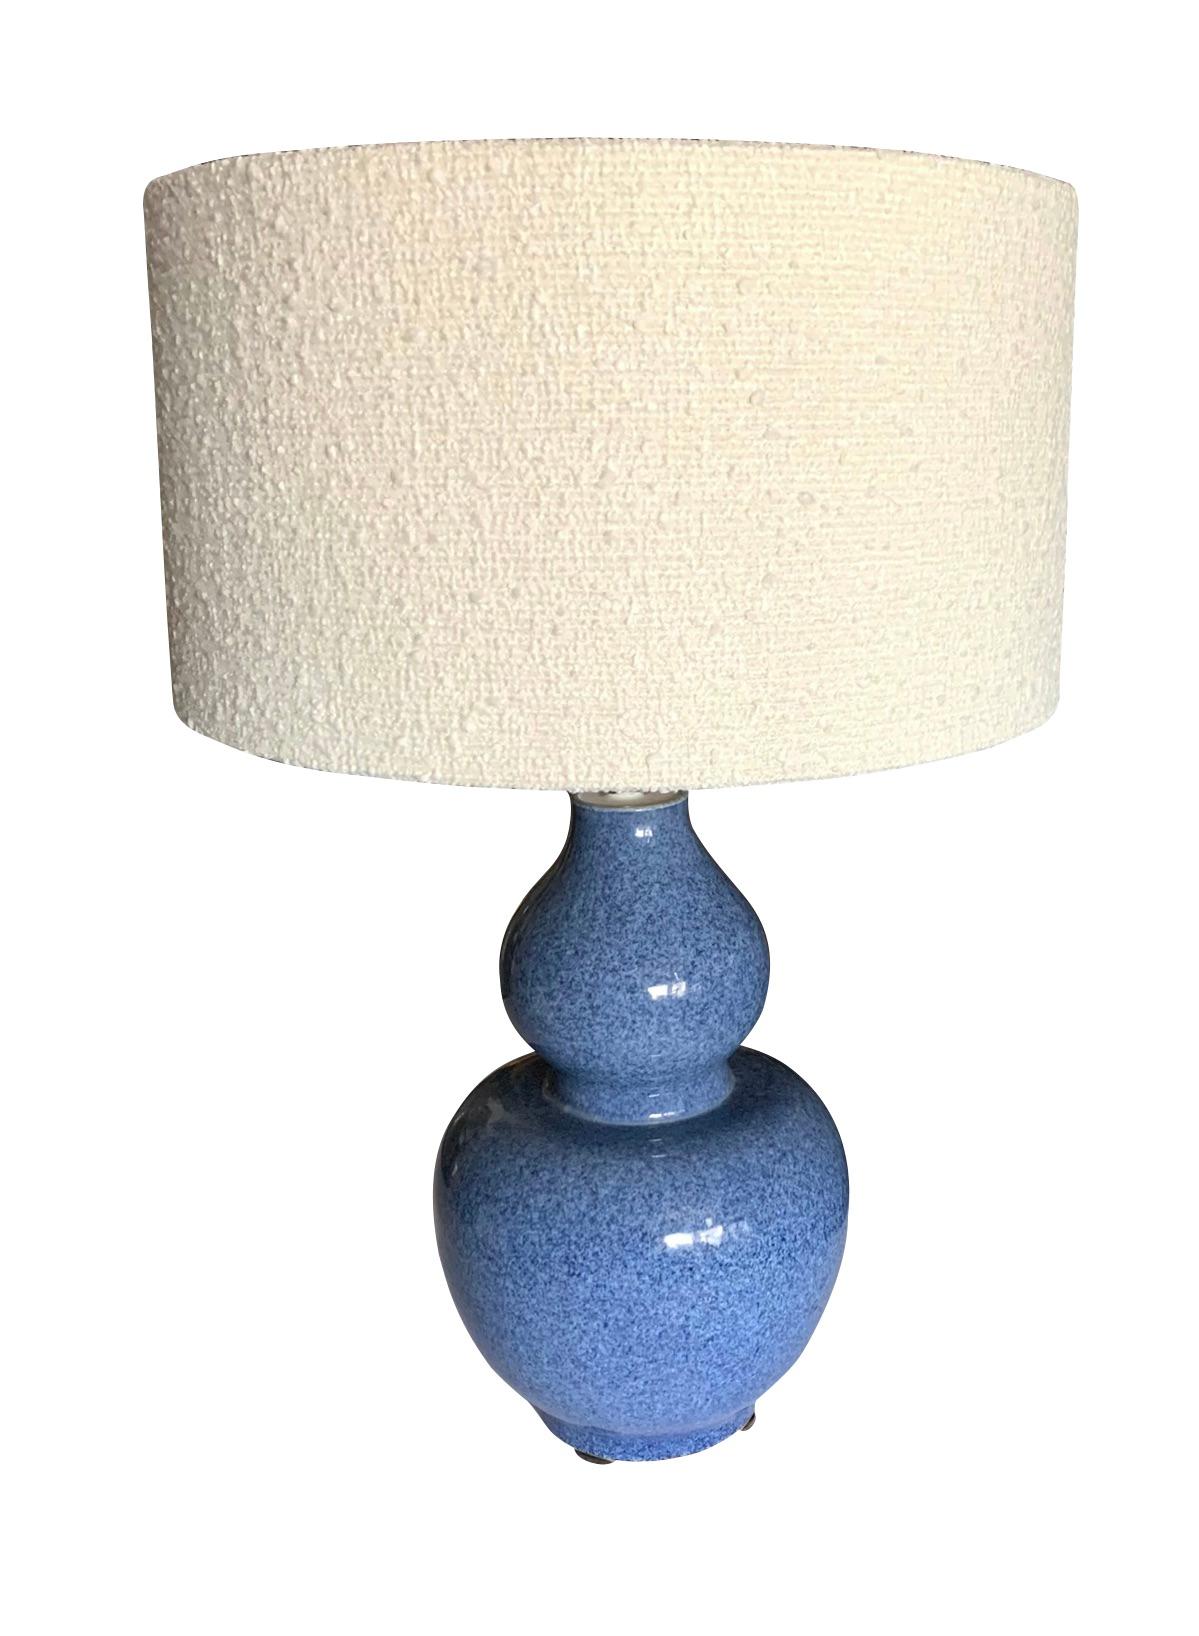 Contemporary Chinese pair speckled blue glaze ceramic vase gourd shaped lamps.
White boucle fabric shades included.
Base measures 8.5